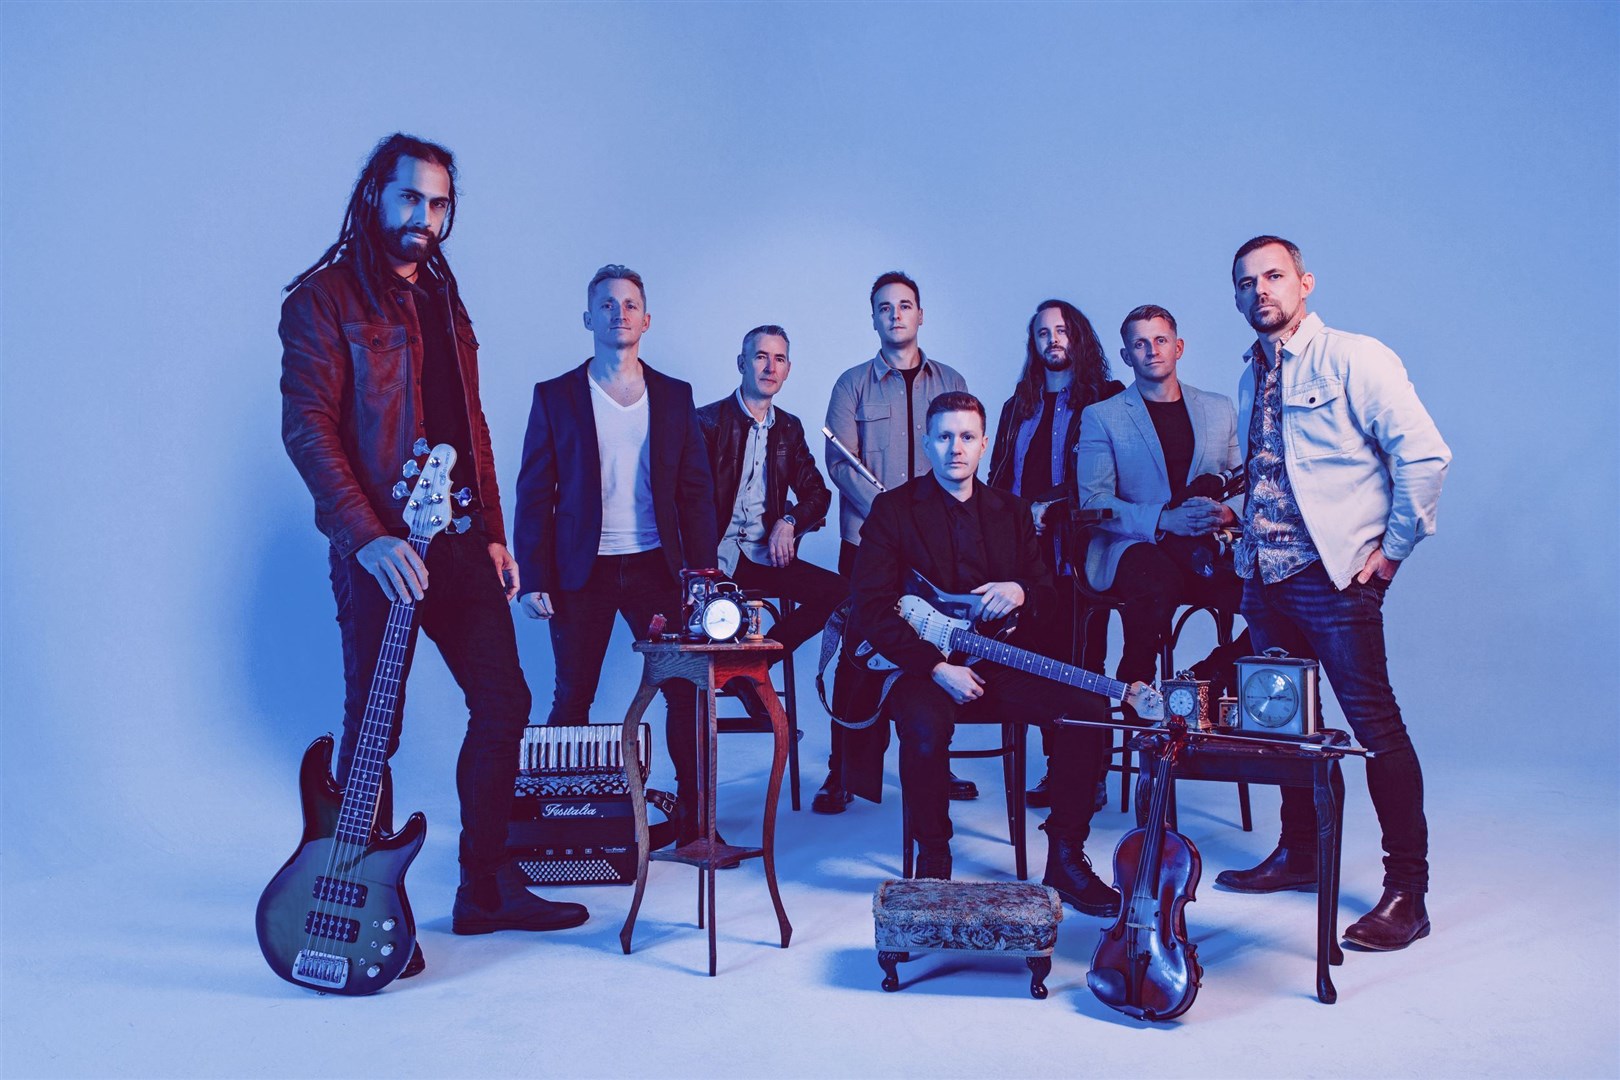 Skerryvore will headline the festival's music offering.